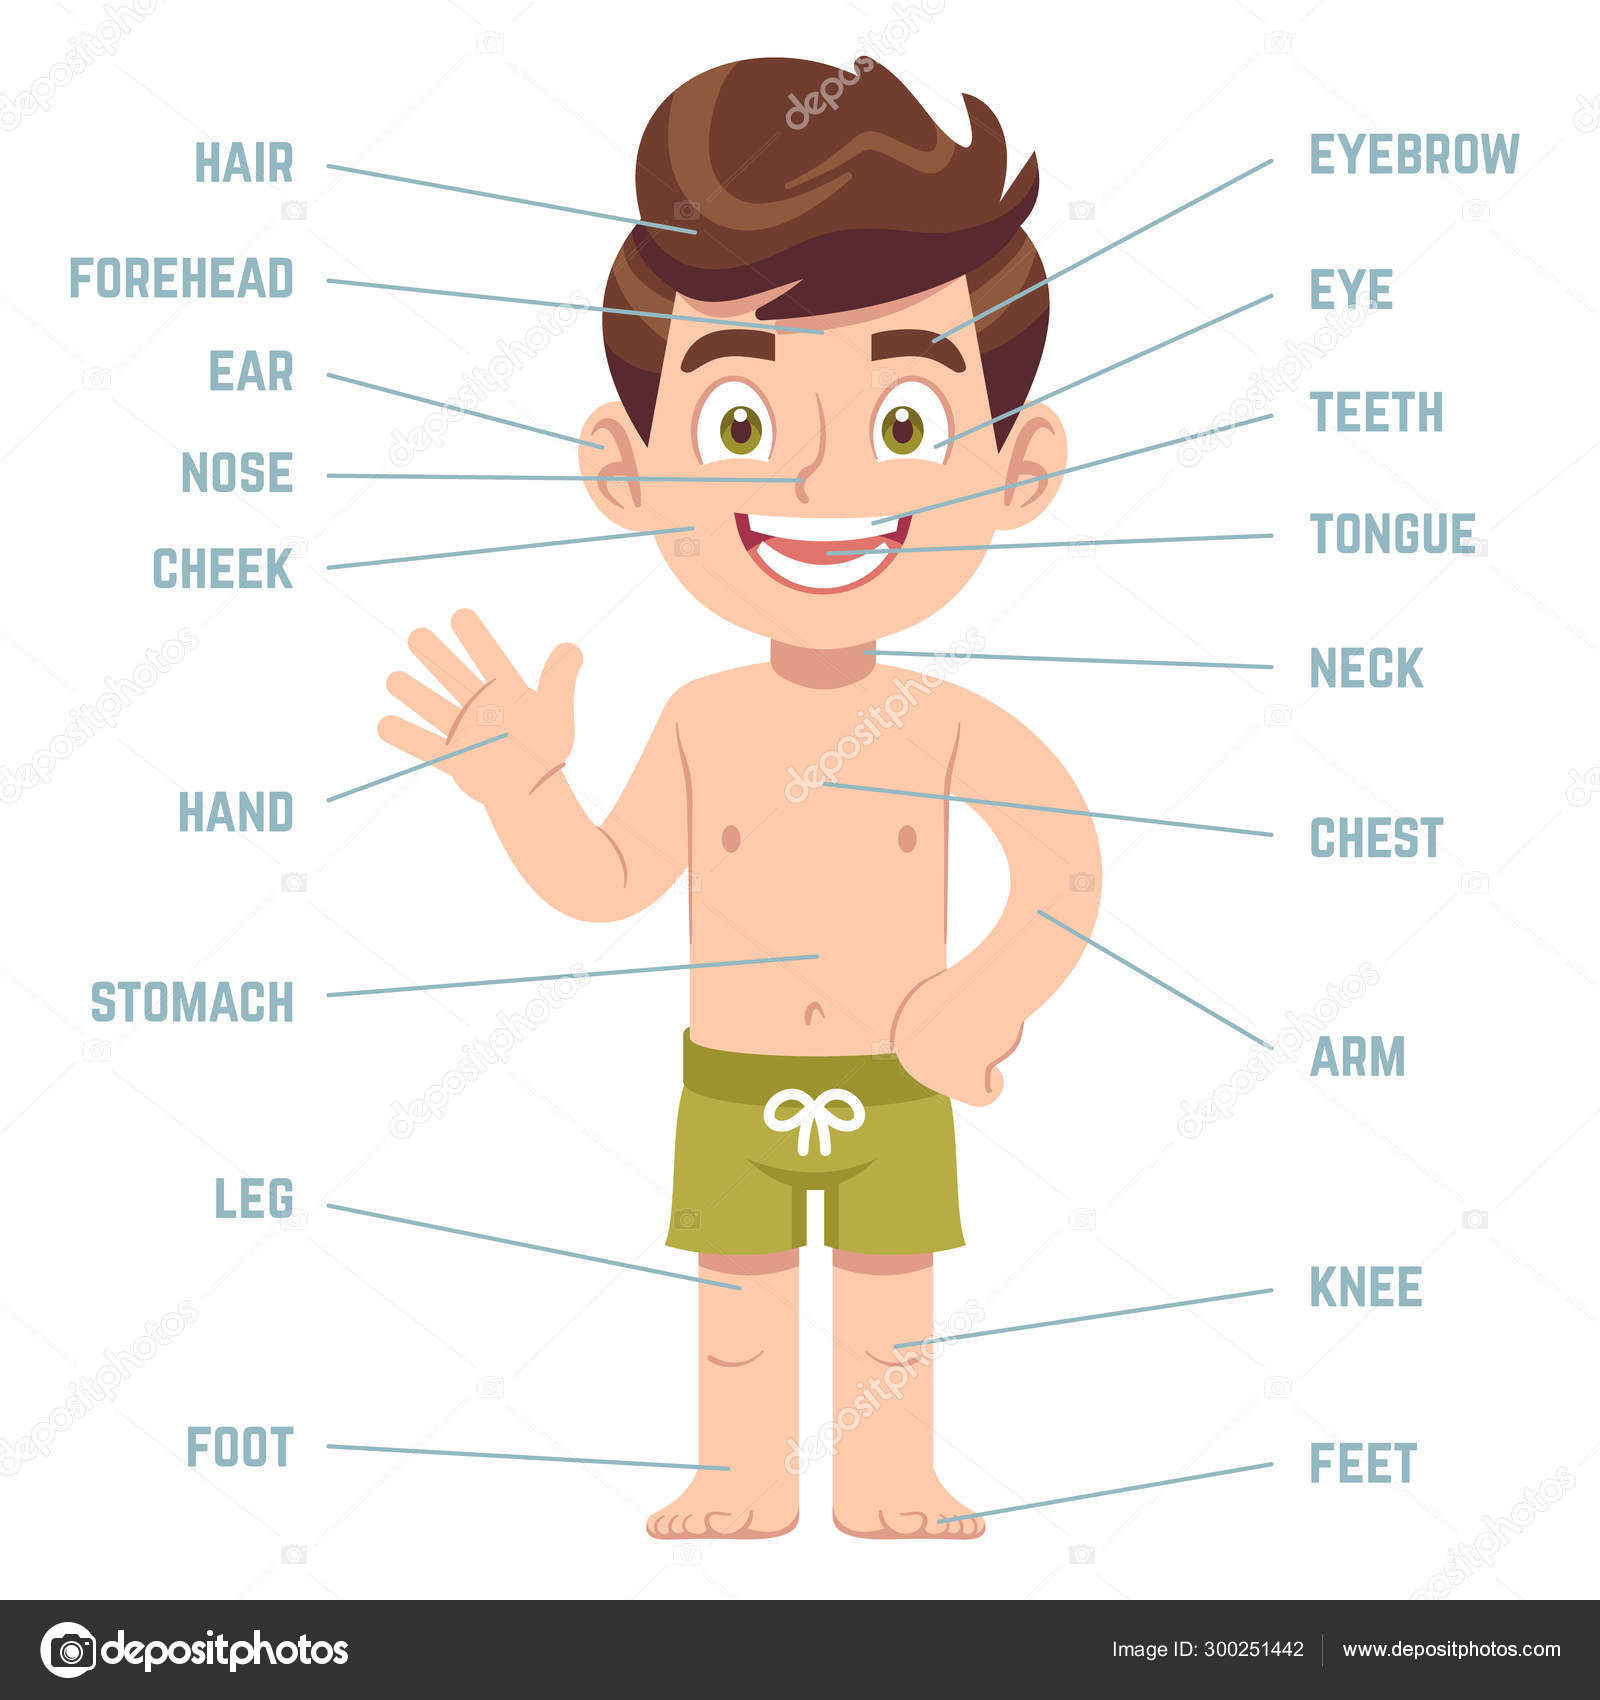 Child Body Parts  Boy With Eye  Nose And Mouth  Hair  Ear